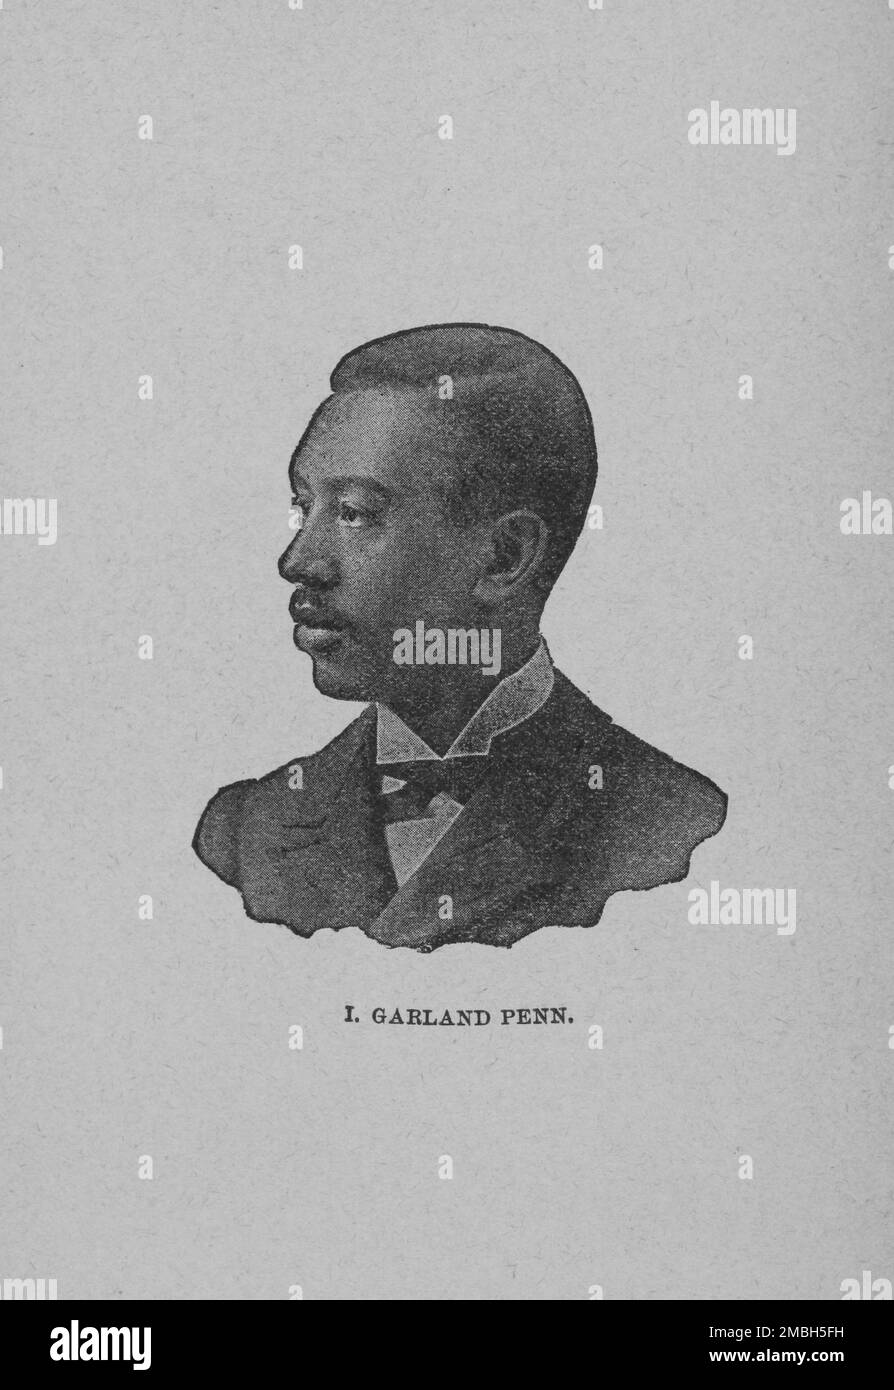 I. Garland Penn, 1897. African-American educator, writer and journalist Irvine Garland Penn was a lay leader in the Methodist Episcopal church. He was co-author with Frederick Douglass, Ida B. Wells, and Ferdinand Lee Barnett of 'The Reason Why the Colored American Is Not in the World's Columbia Exposition' [1893]. From 'The white side of a black subject, enlarged and brought down to date; a vindication of the Afro-American race; from the landing of slaves at St. Augustine, Florida, in 1565, to the present time'. Stock Photo